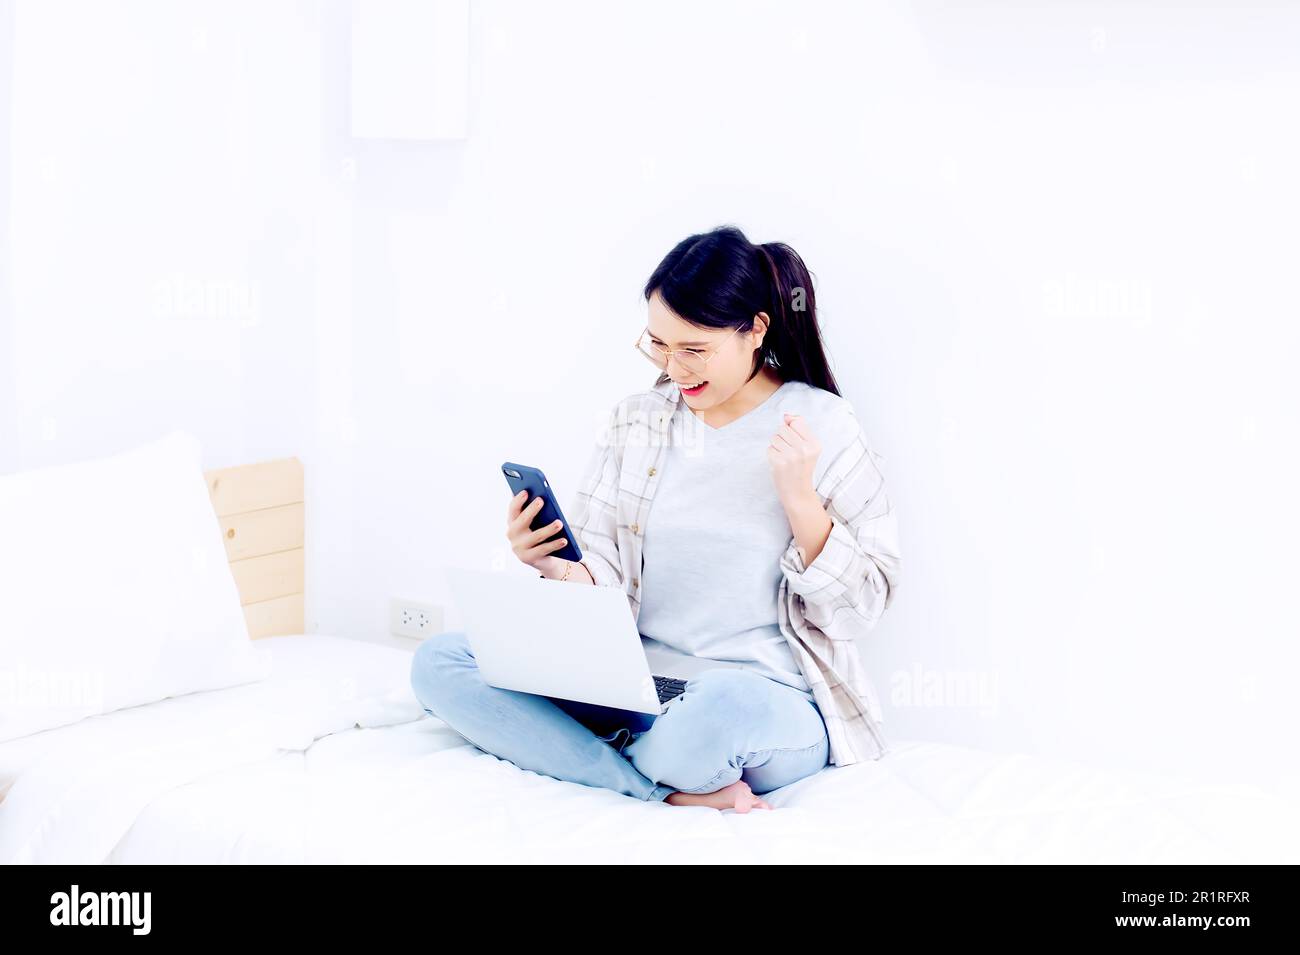 Smiling woman sitting cross-legged on her bed using a mobile phone and laptop computer Stock Photo